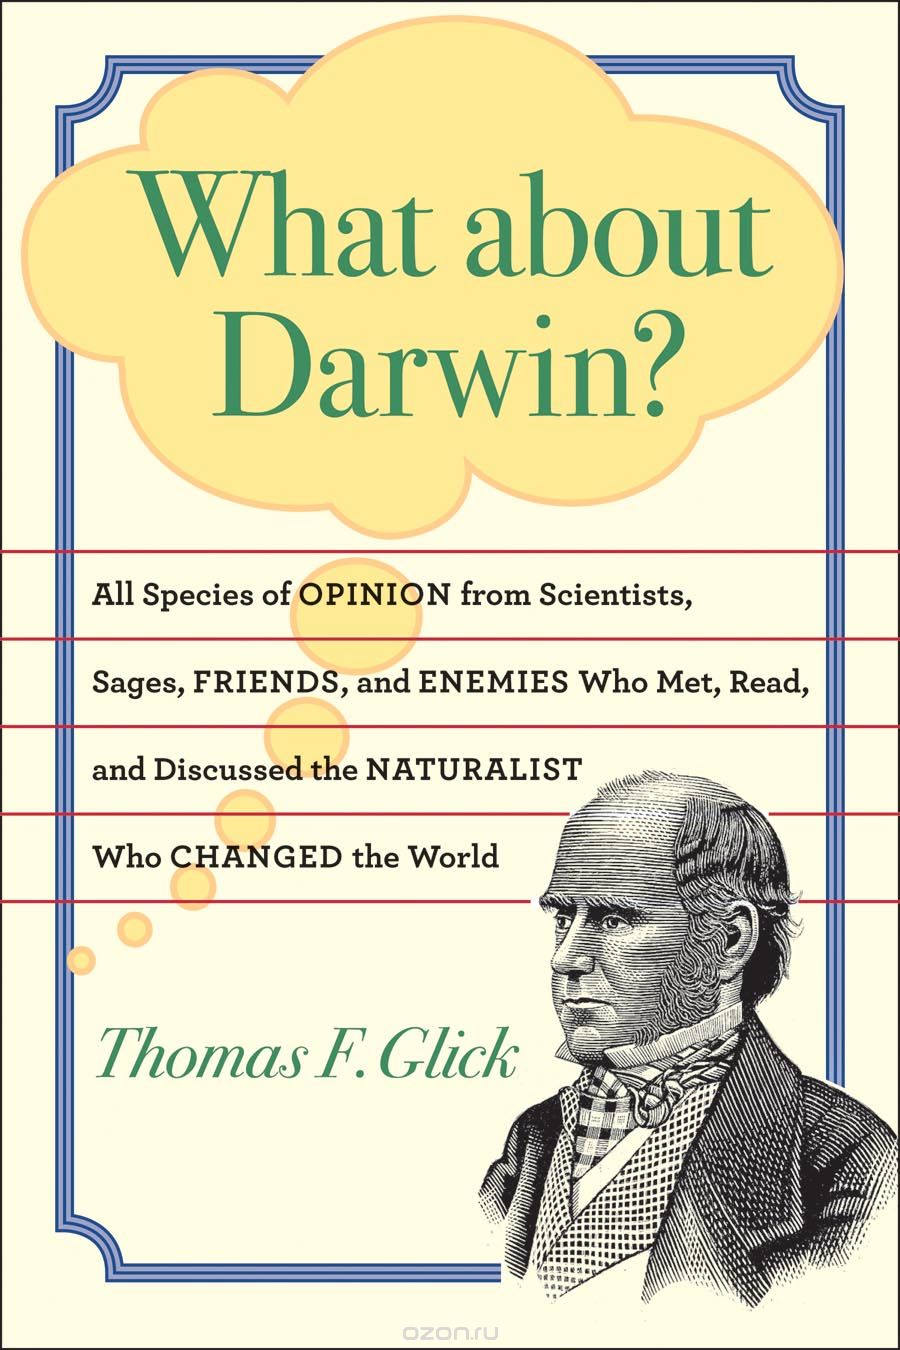 What about Darwin? – All Species of Opinion from Scientists, Sages, Friends and Enemies, Who Met, Read, and Discussed the Naturalist Who Changed